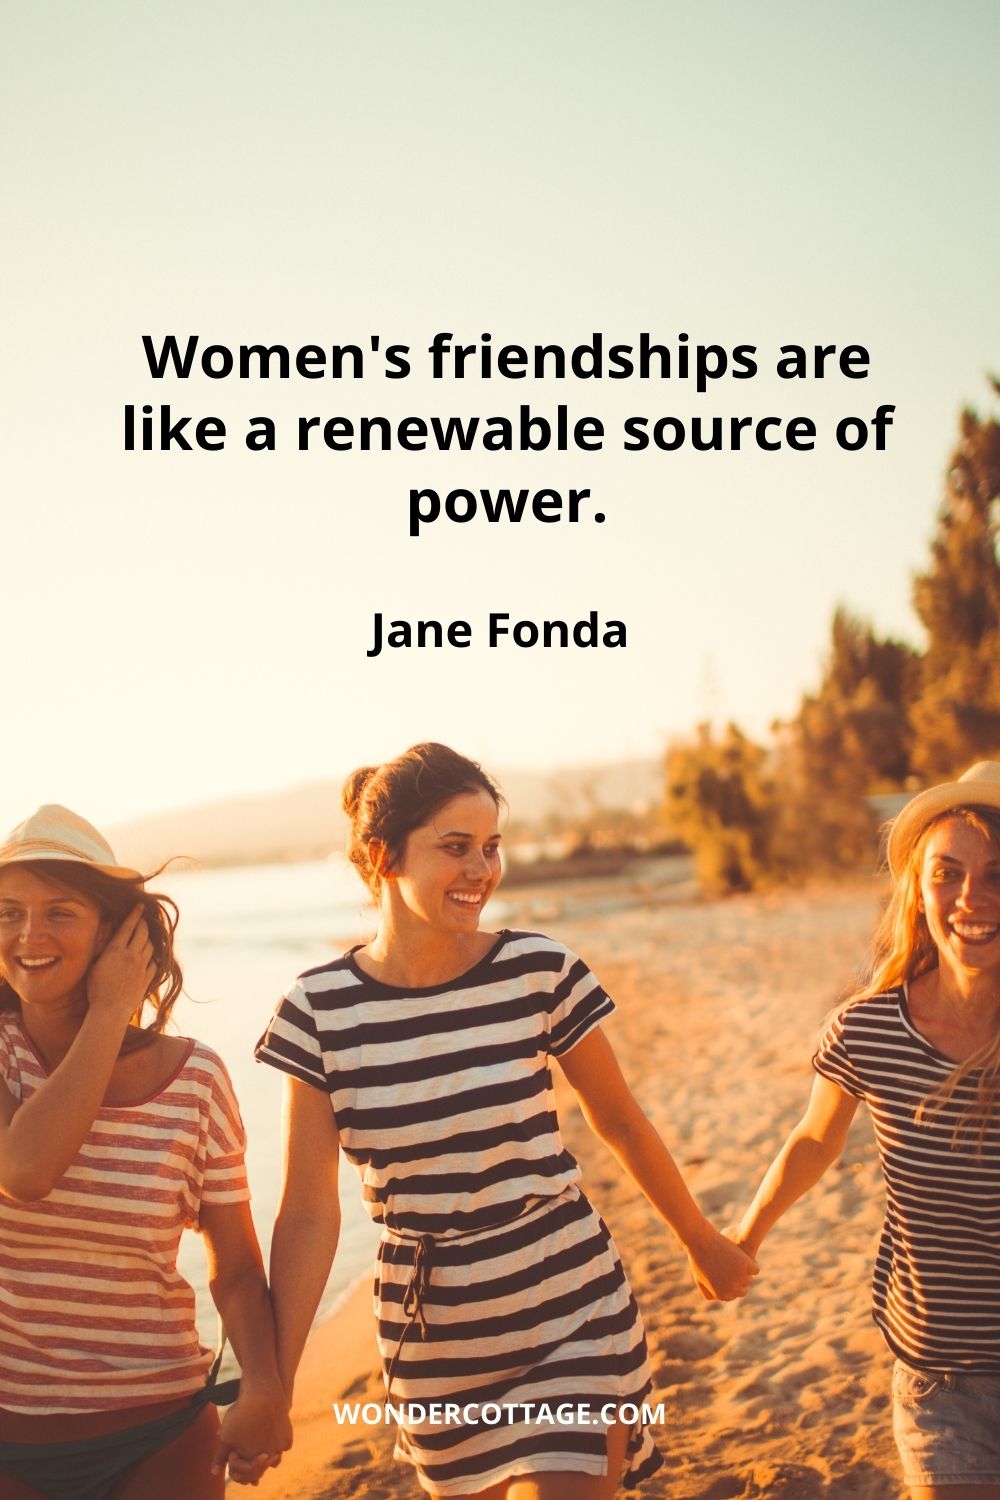 Women's friendships are like a renewable source of power.